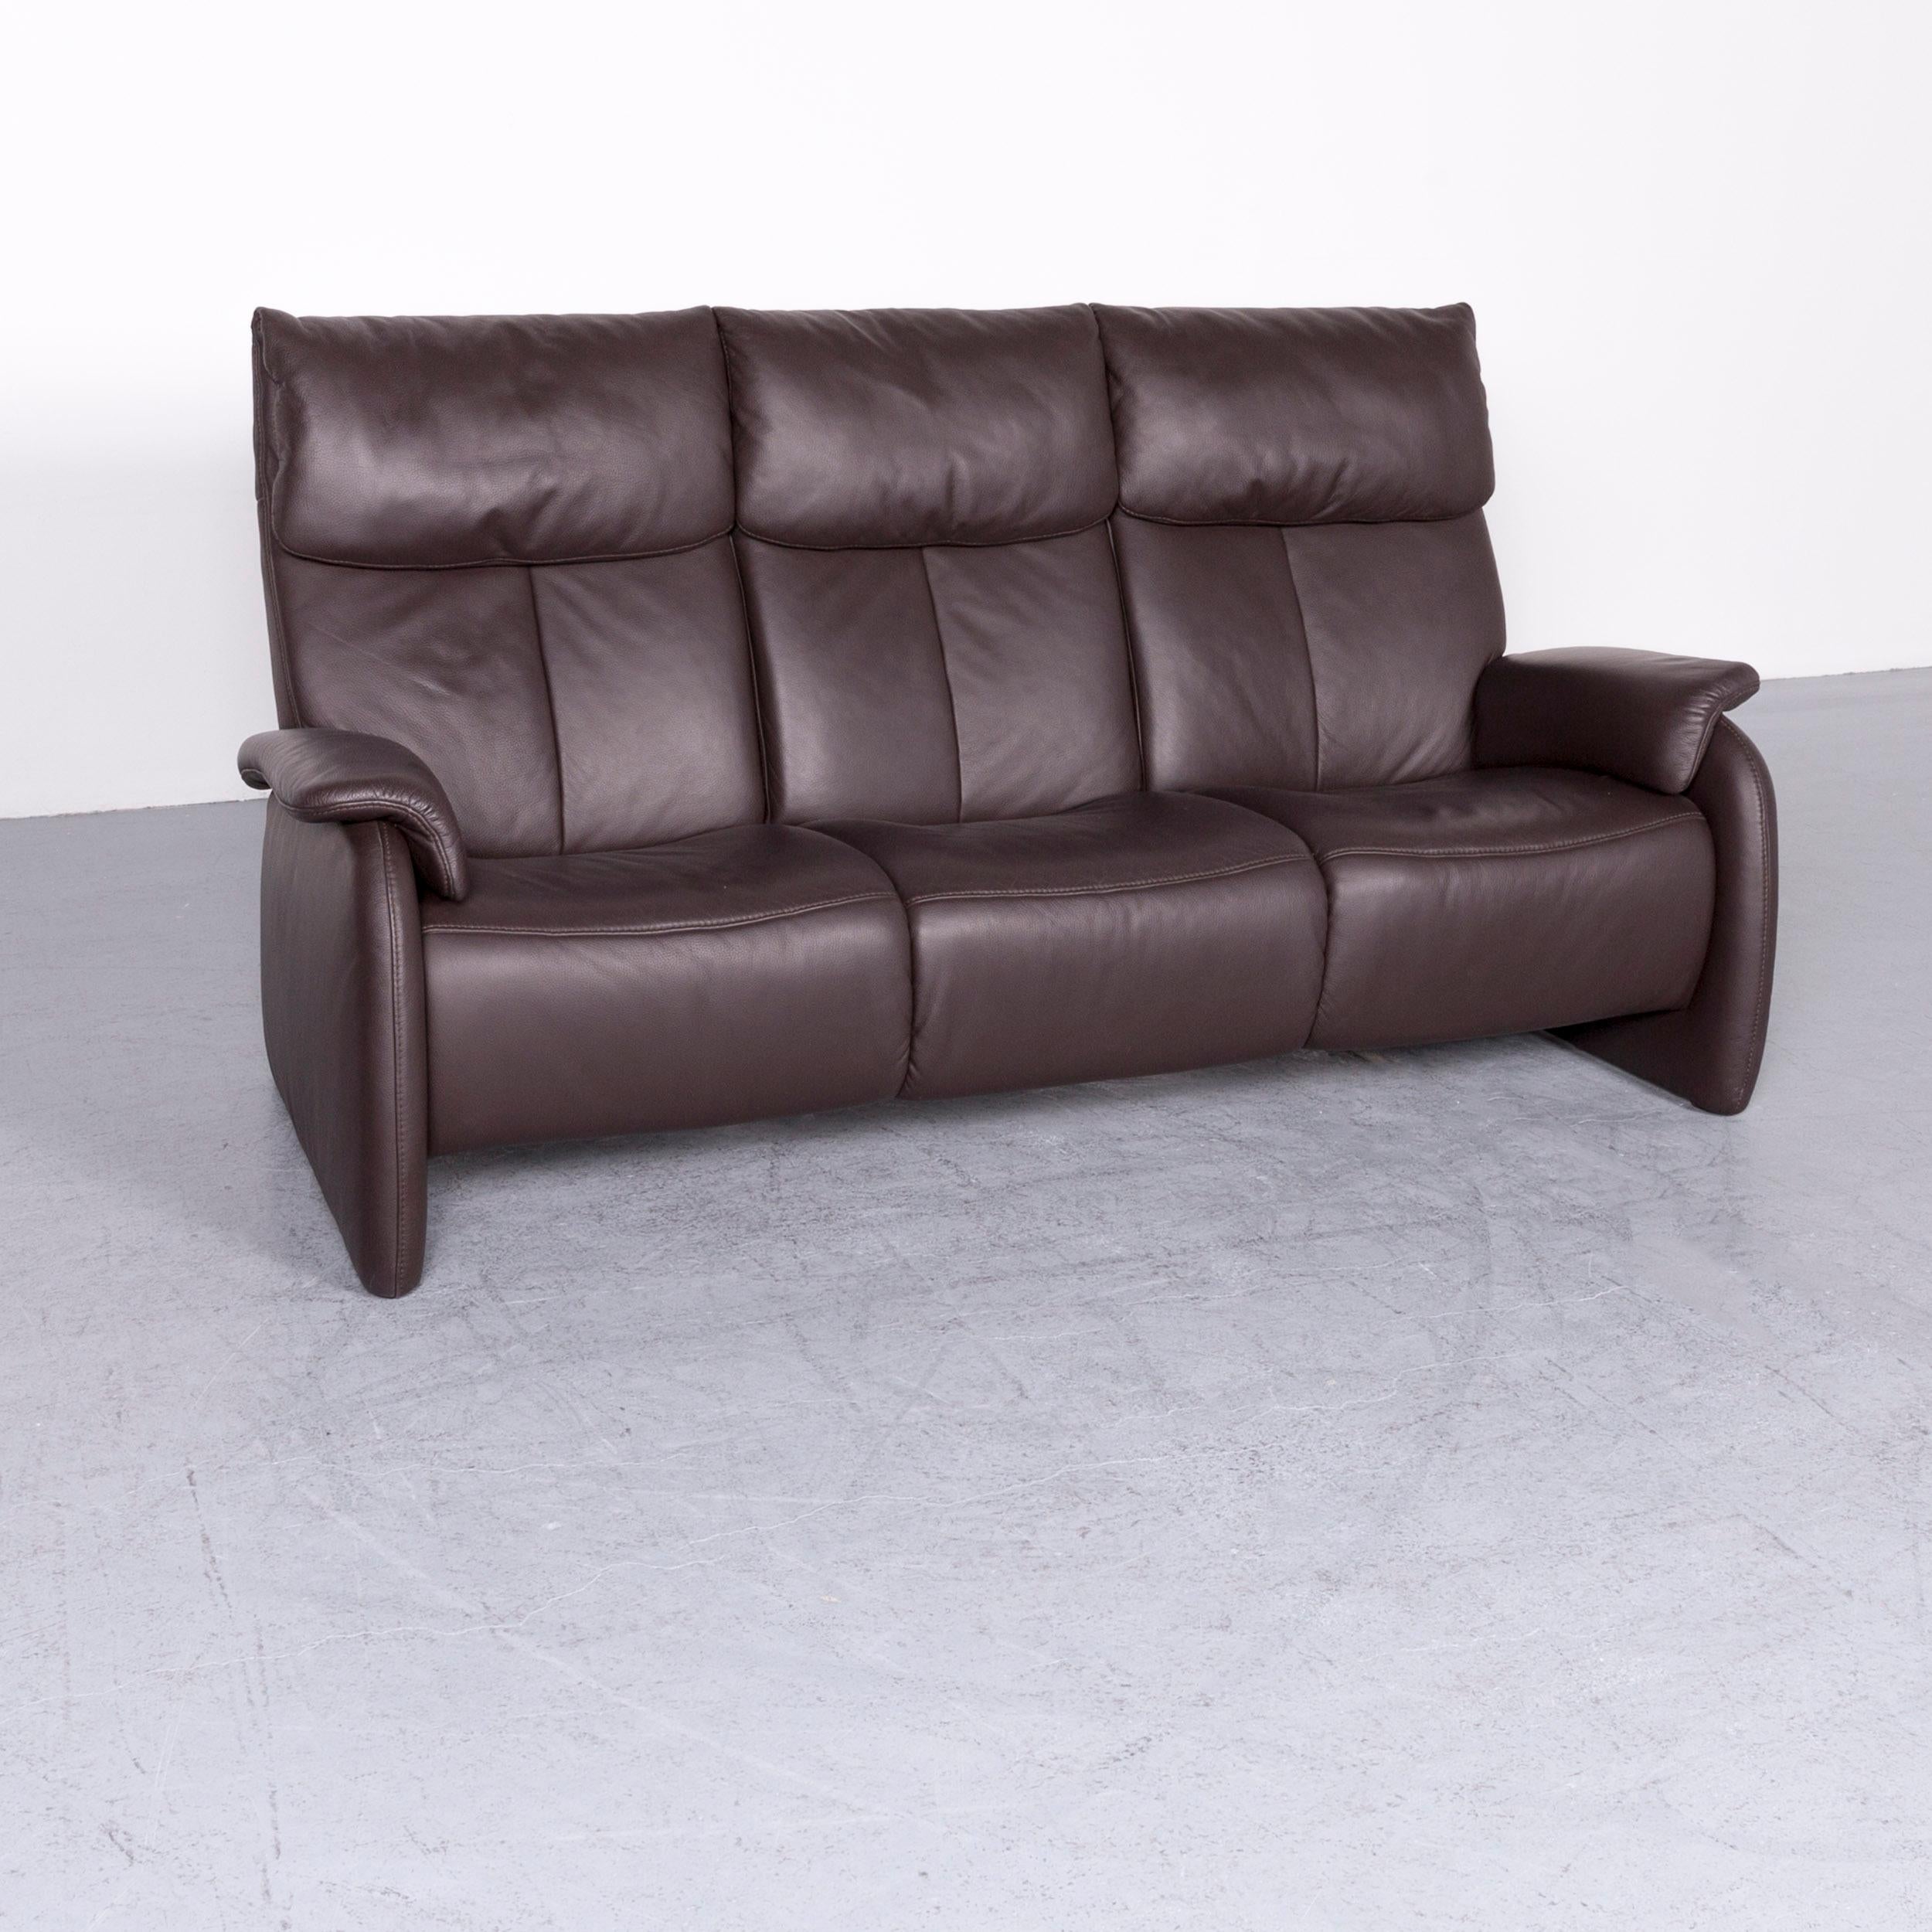 We bring to you a Himolla designer sofa brown leather three-seat couch.


























